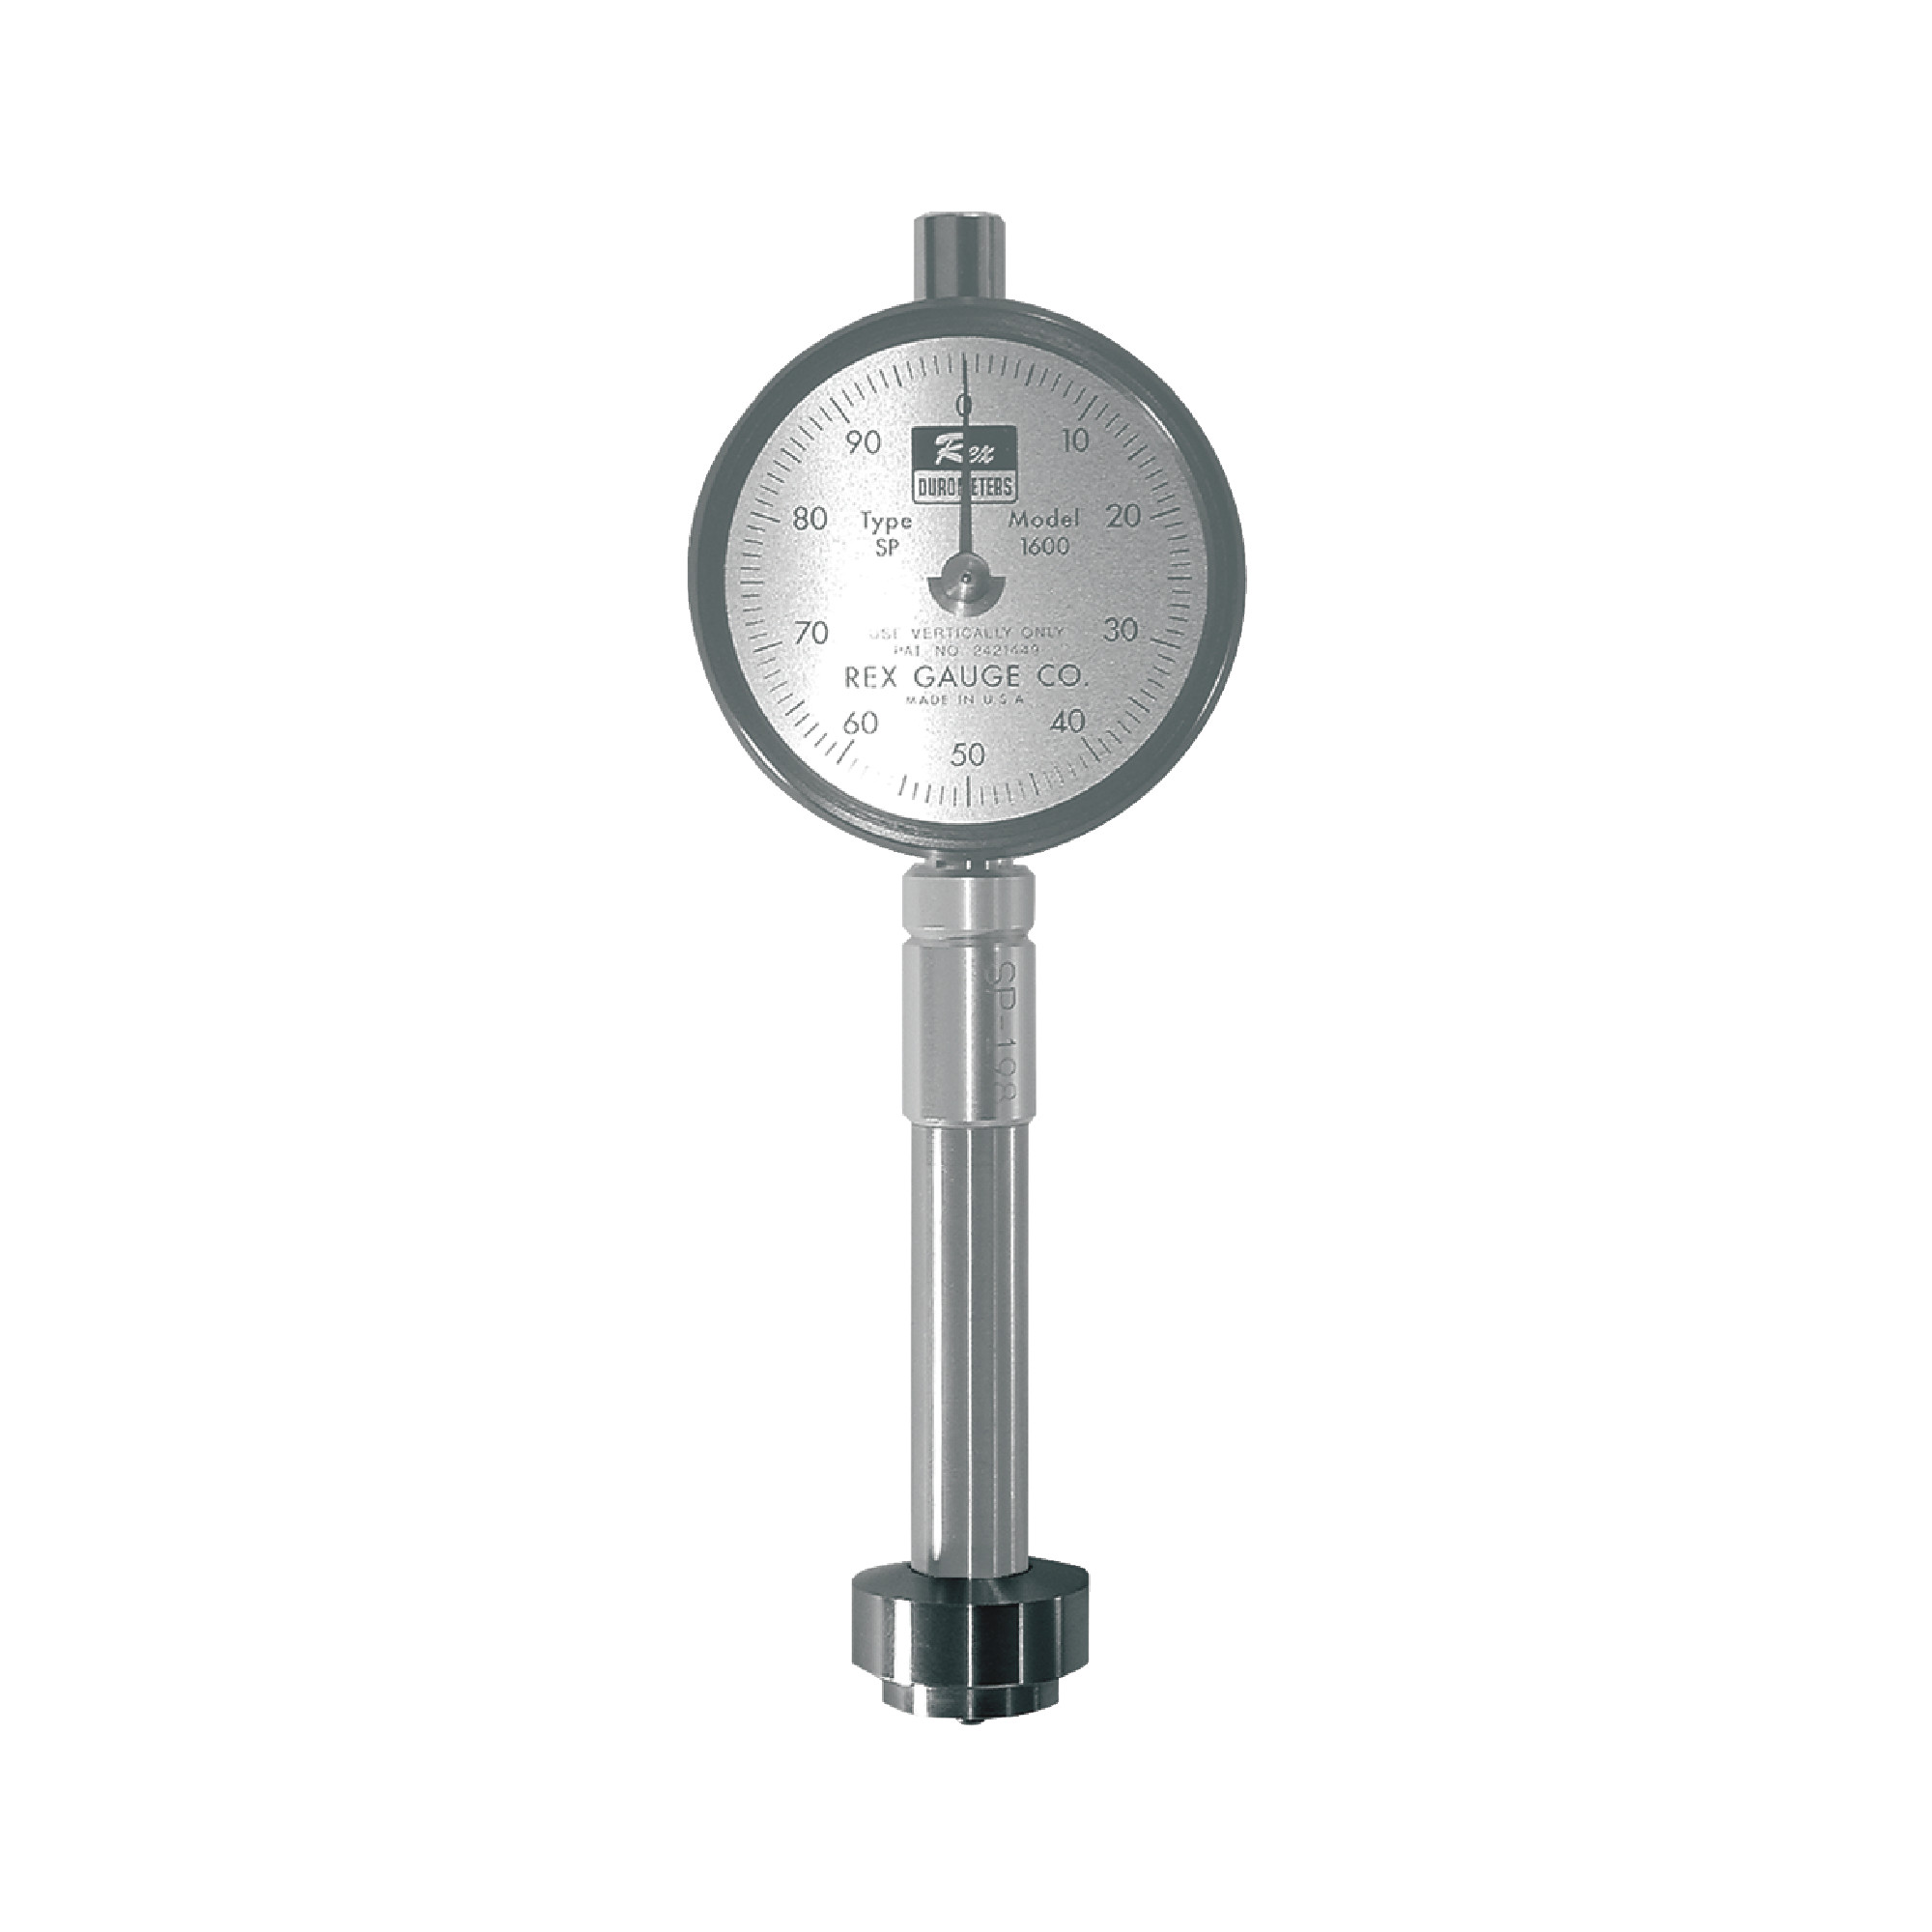 ASTM Type R & DIN 18mm Foot Attachment for Durometer